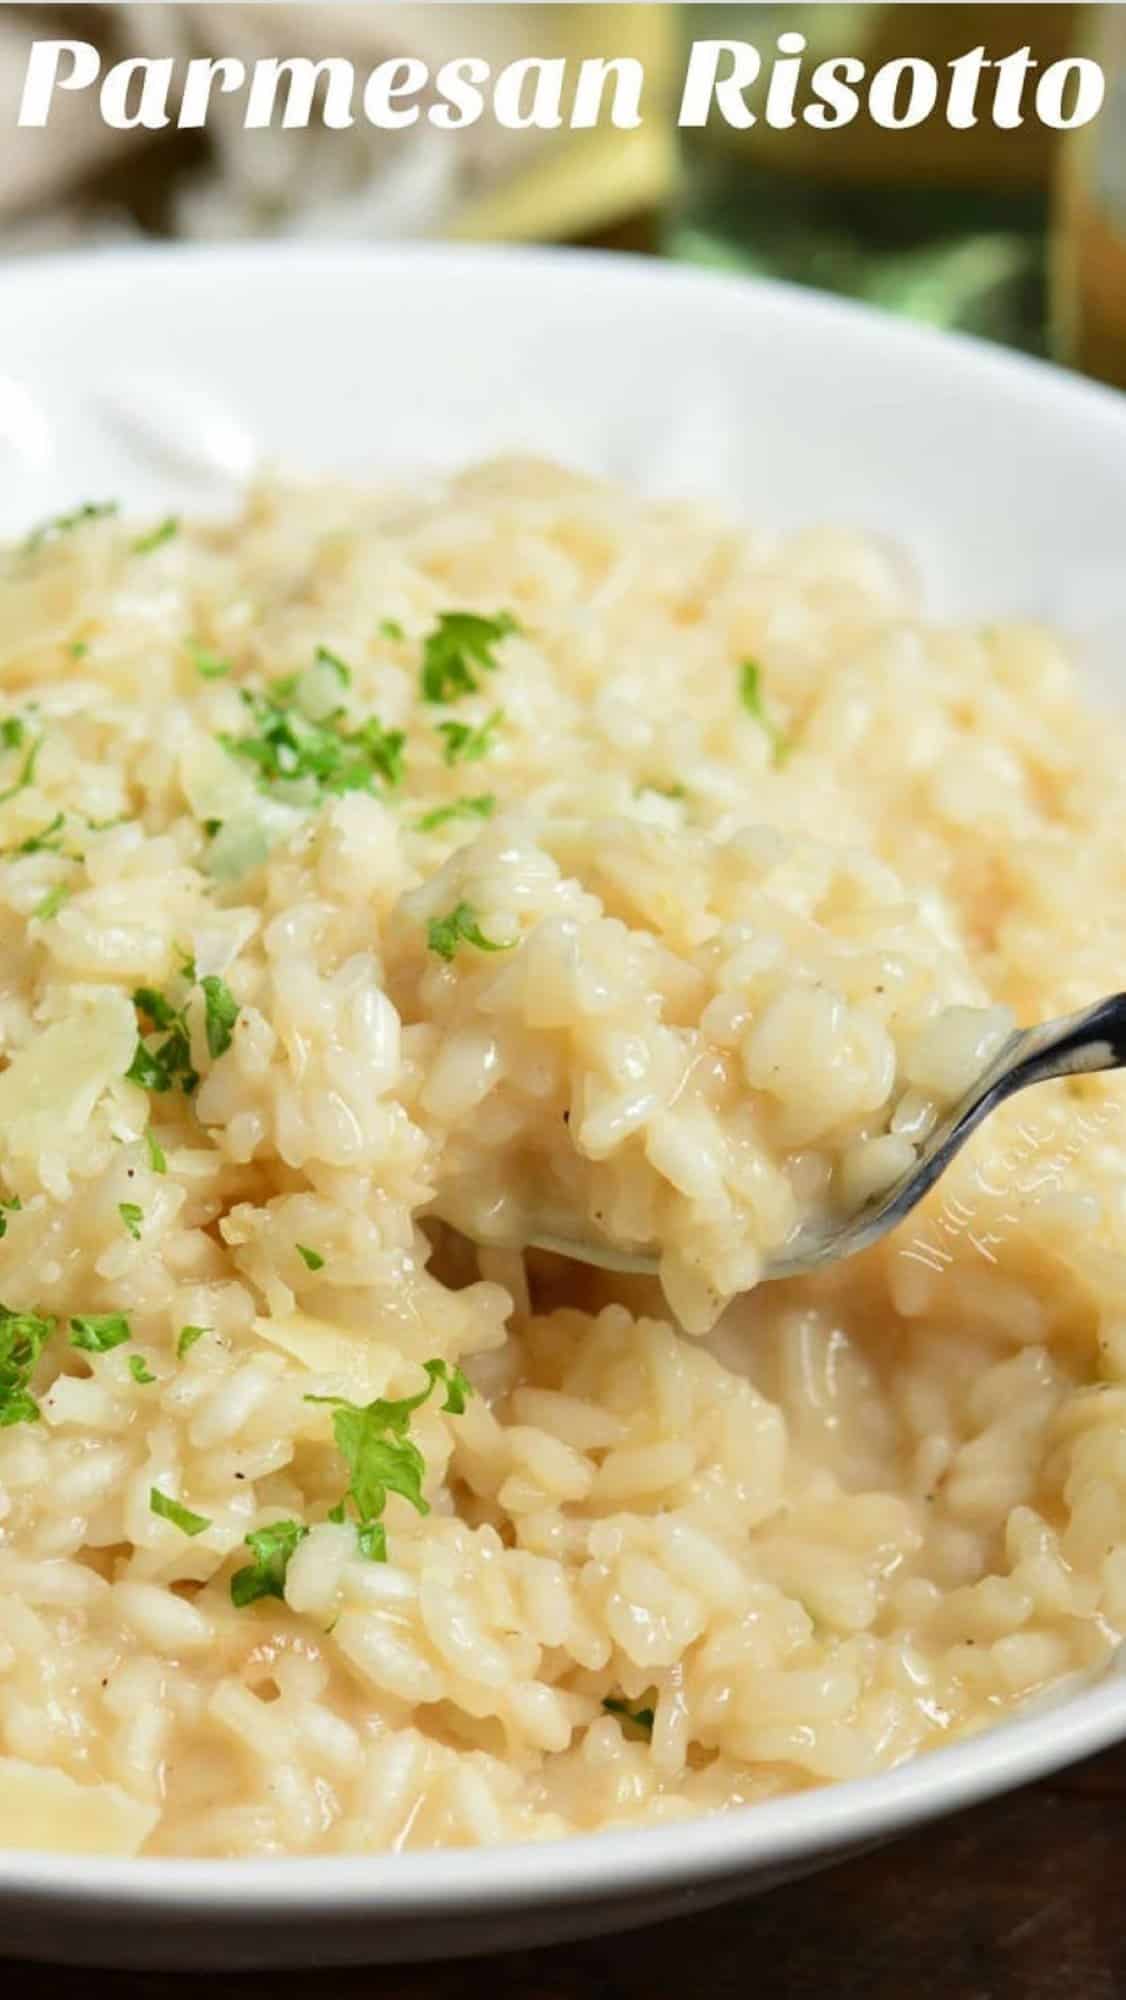 parmesan risotto in a bowl with a fork scooping some up.